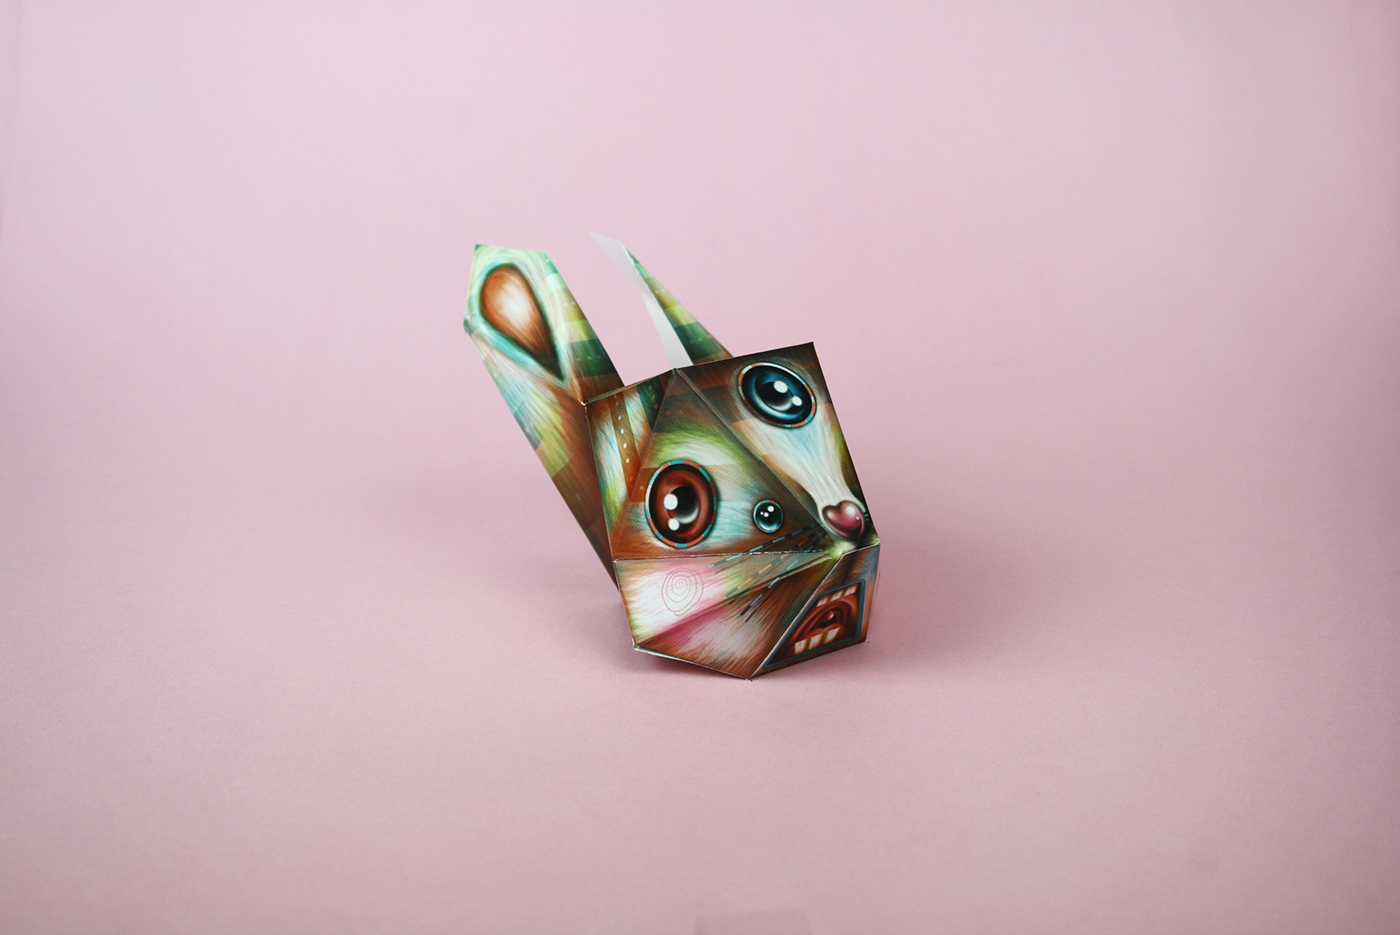 rabbit paper rabbit paper toy paper craft Editions art toys products Compilation ILLUSTRATION  berlin